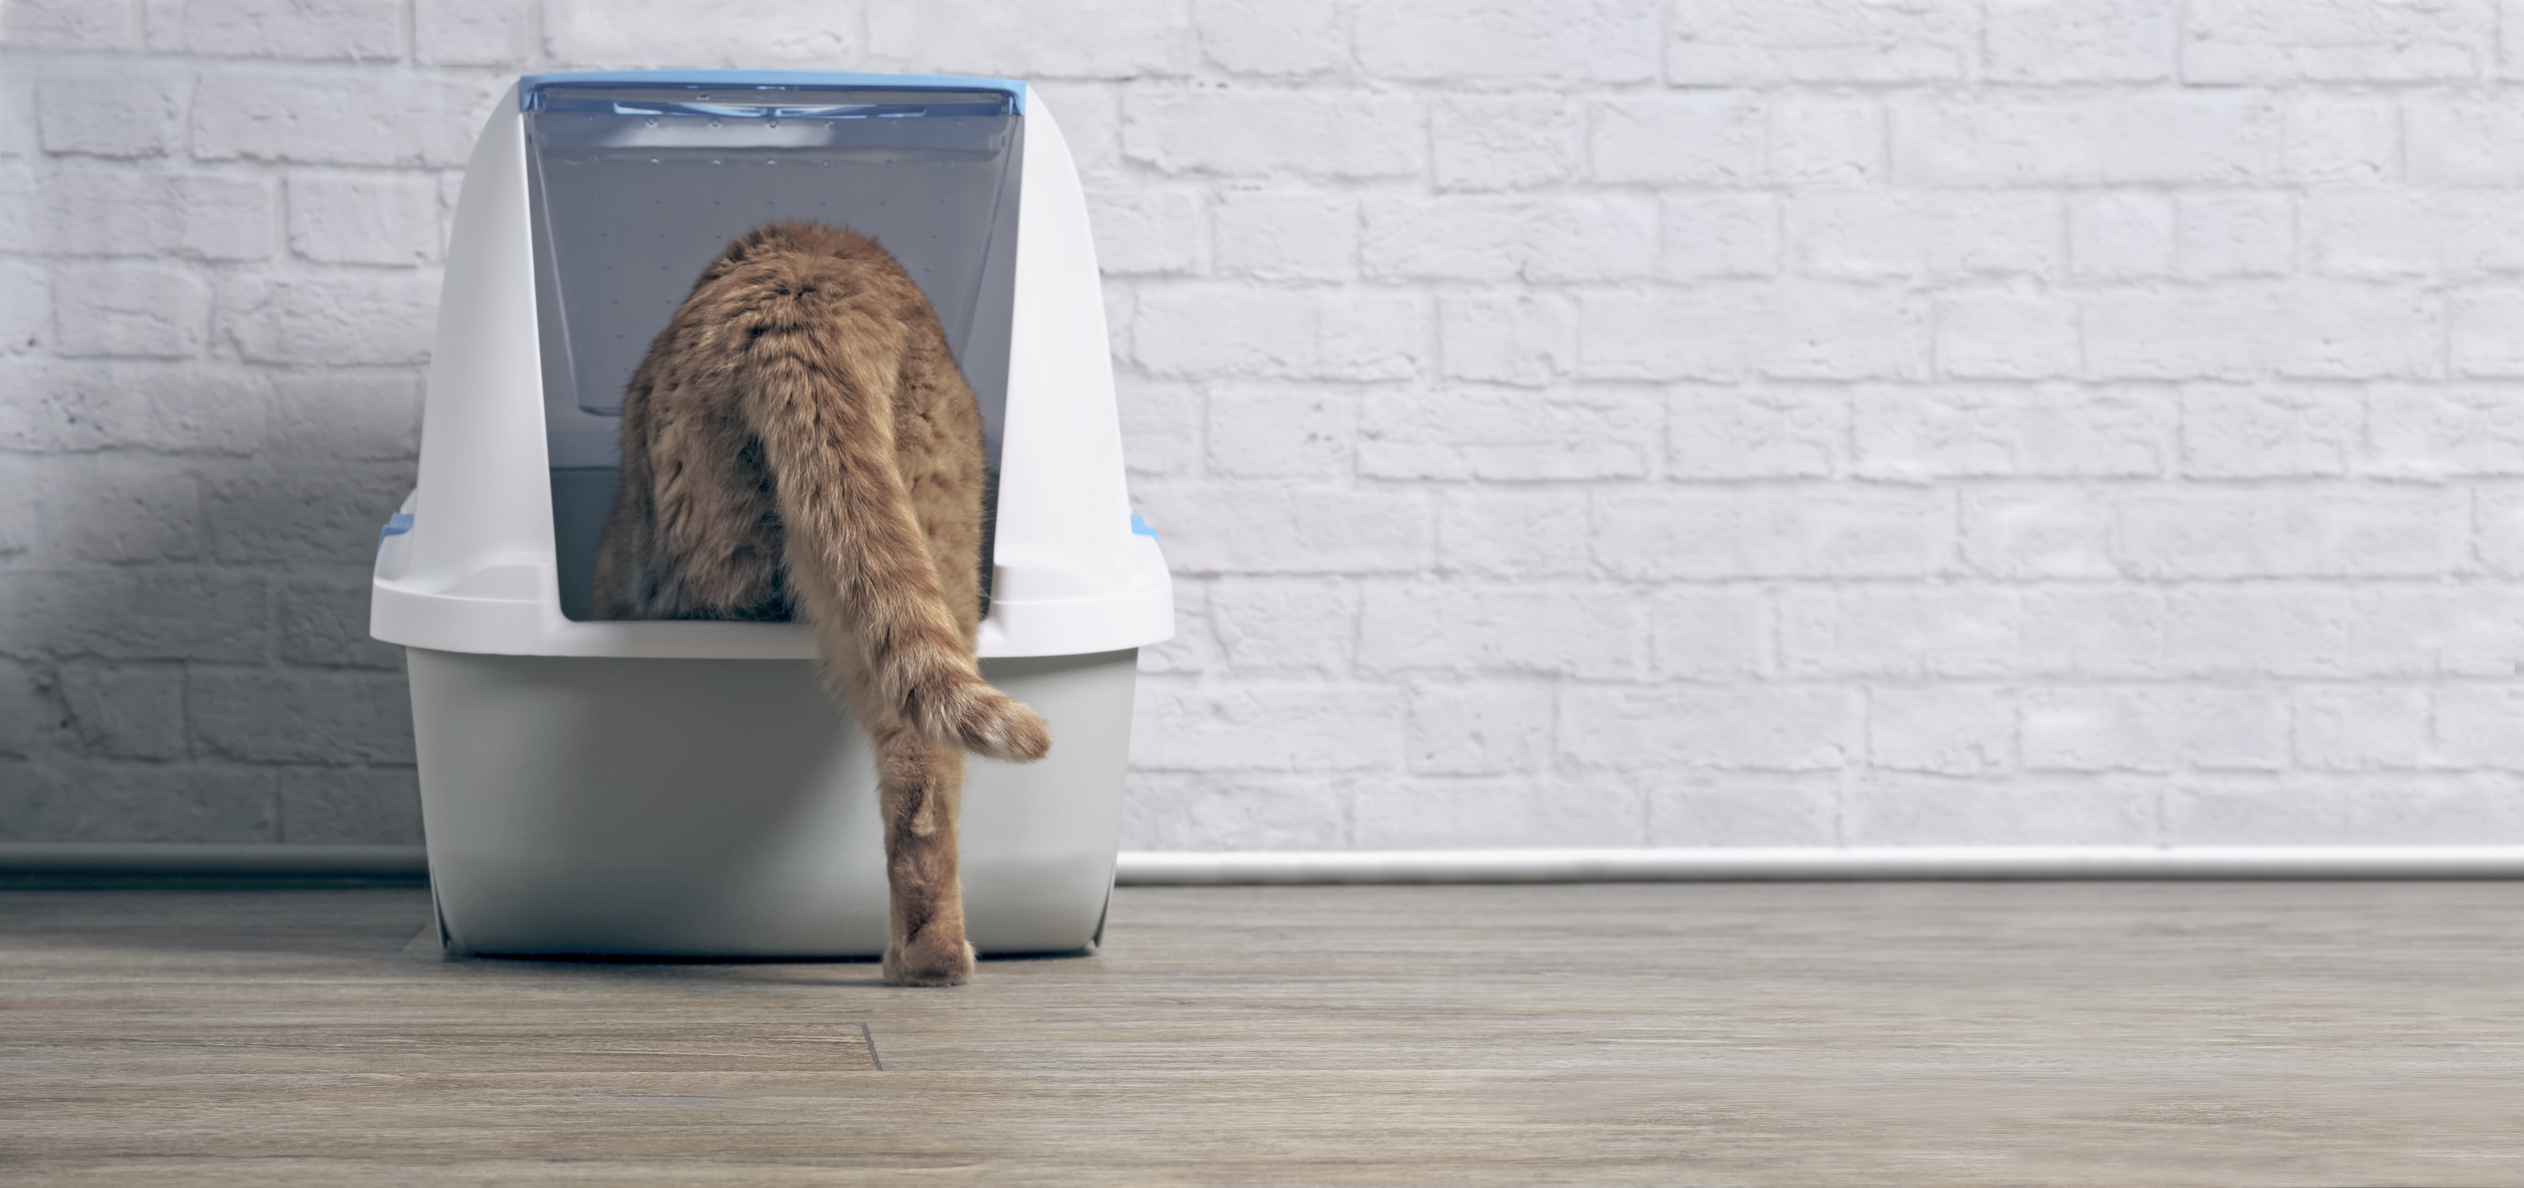 Orange cat uses a covered litter box